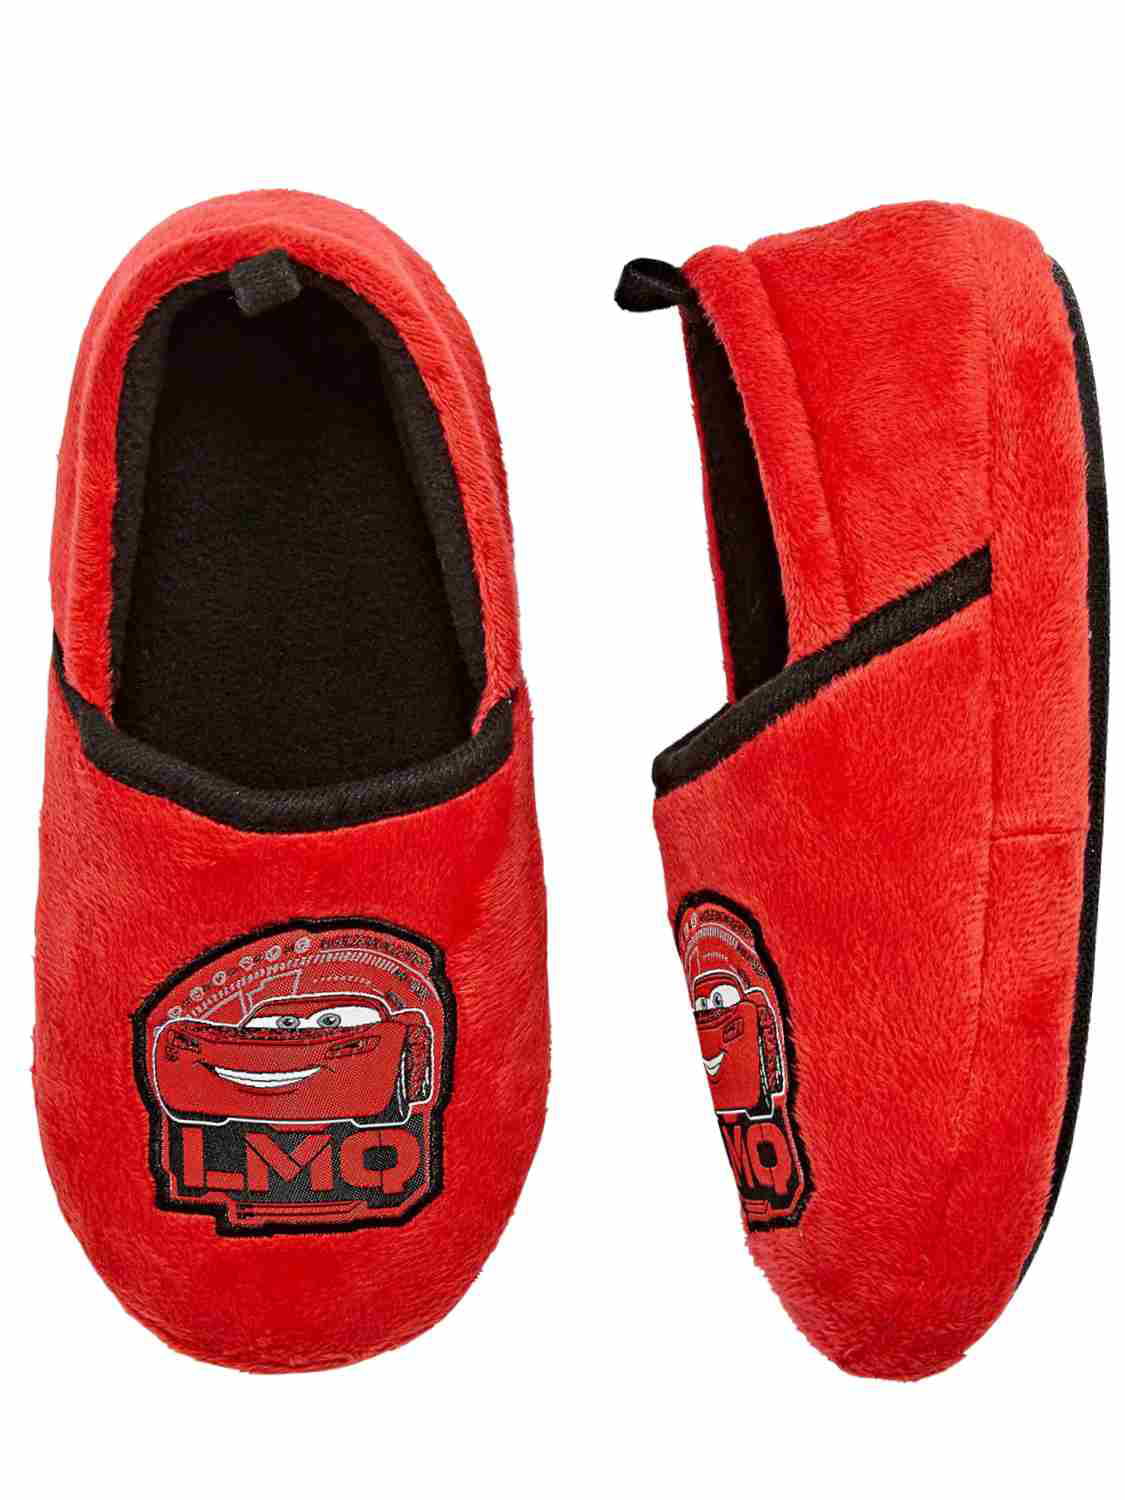 lightning mcqueen shoes size 13